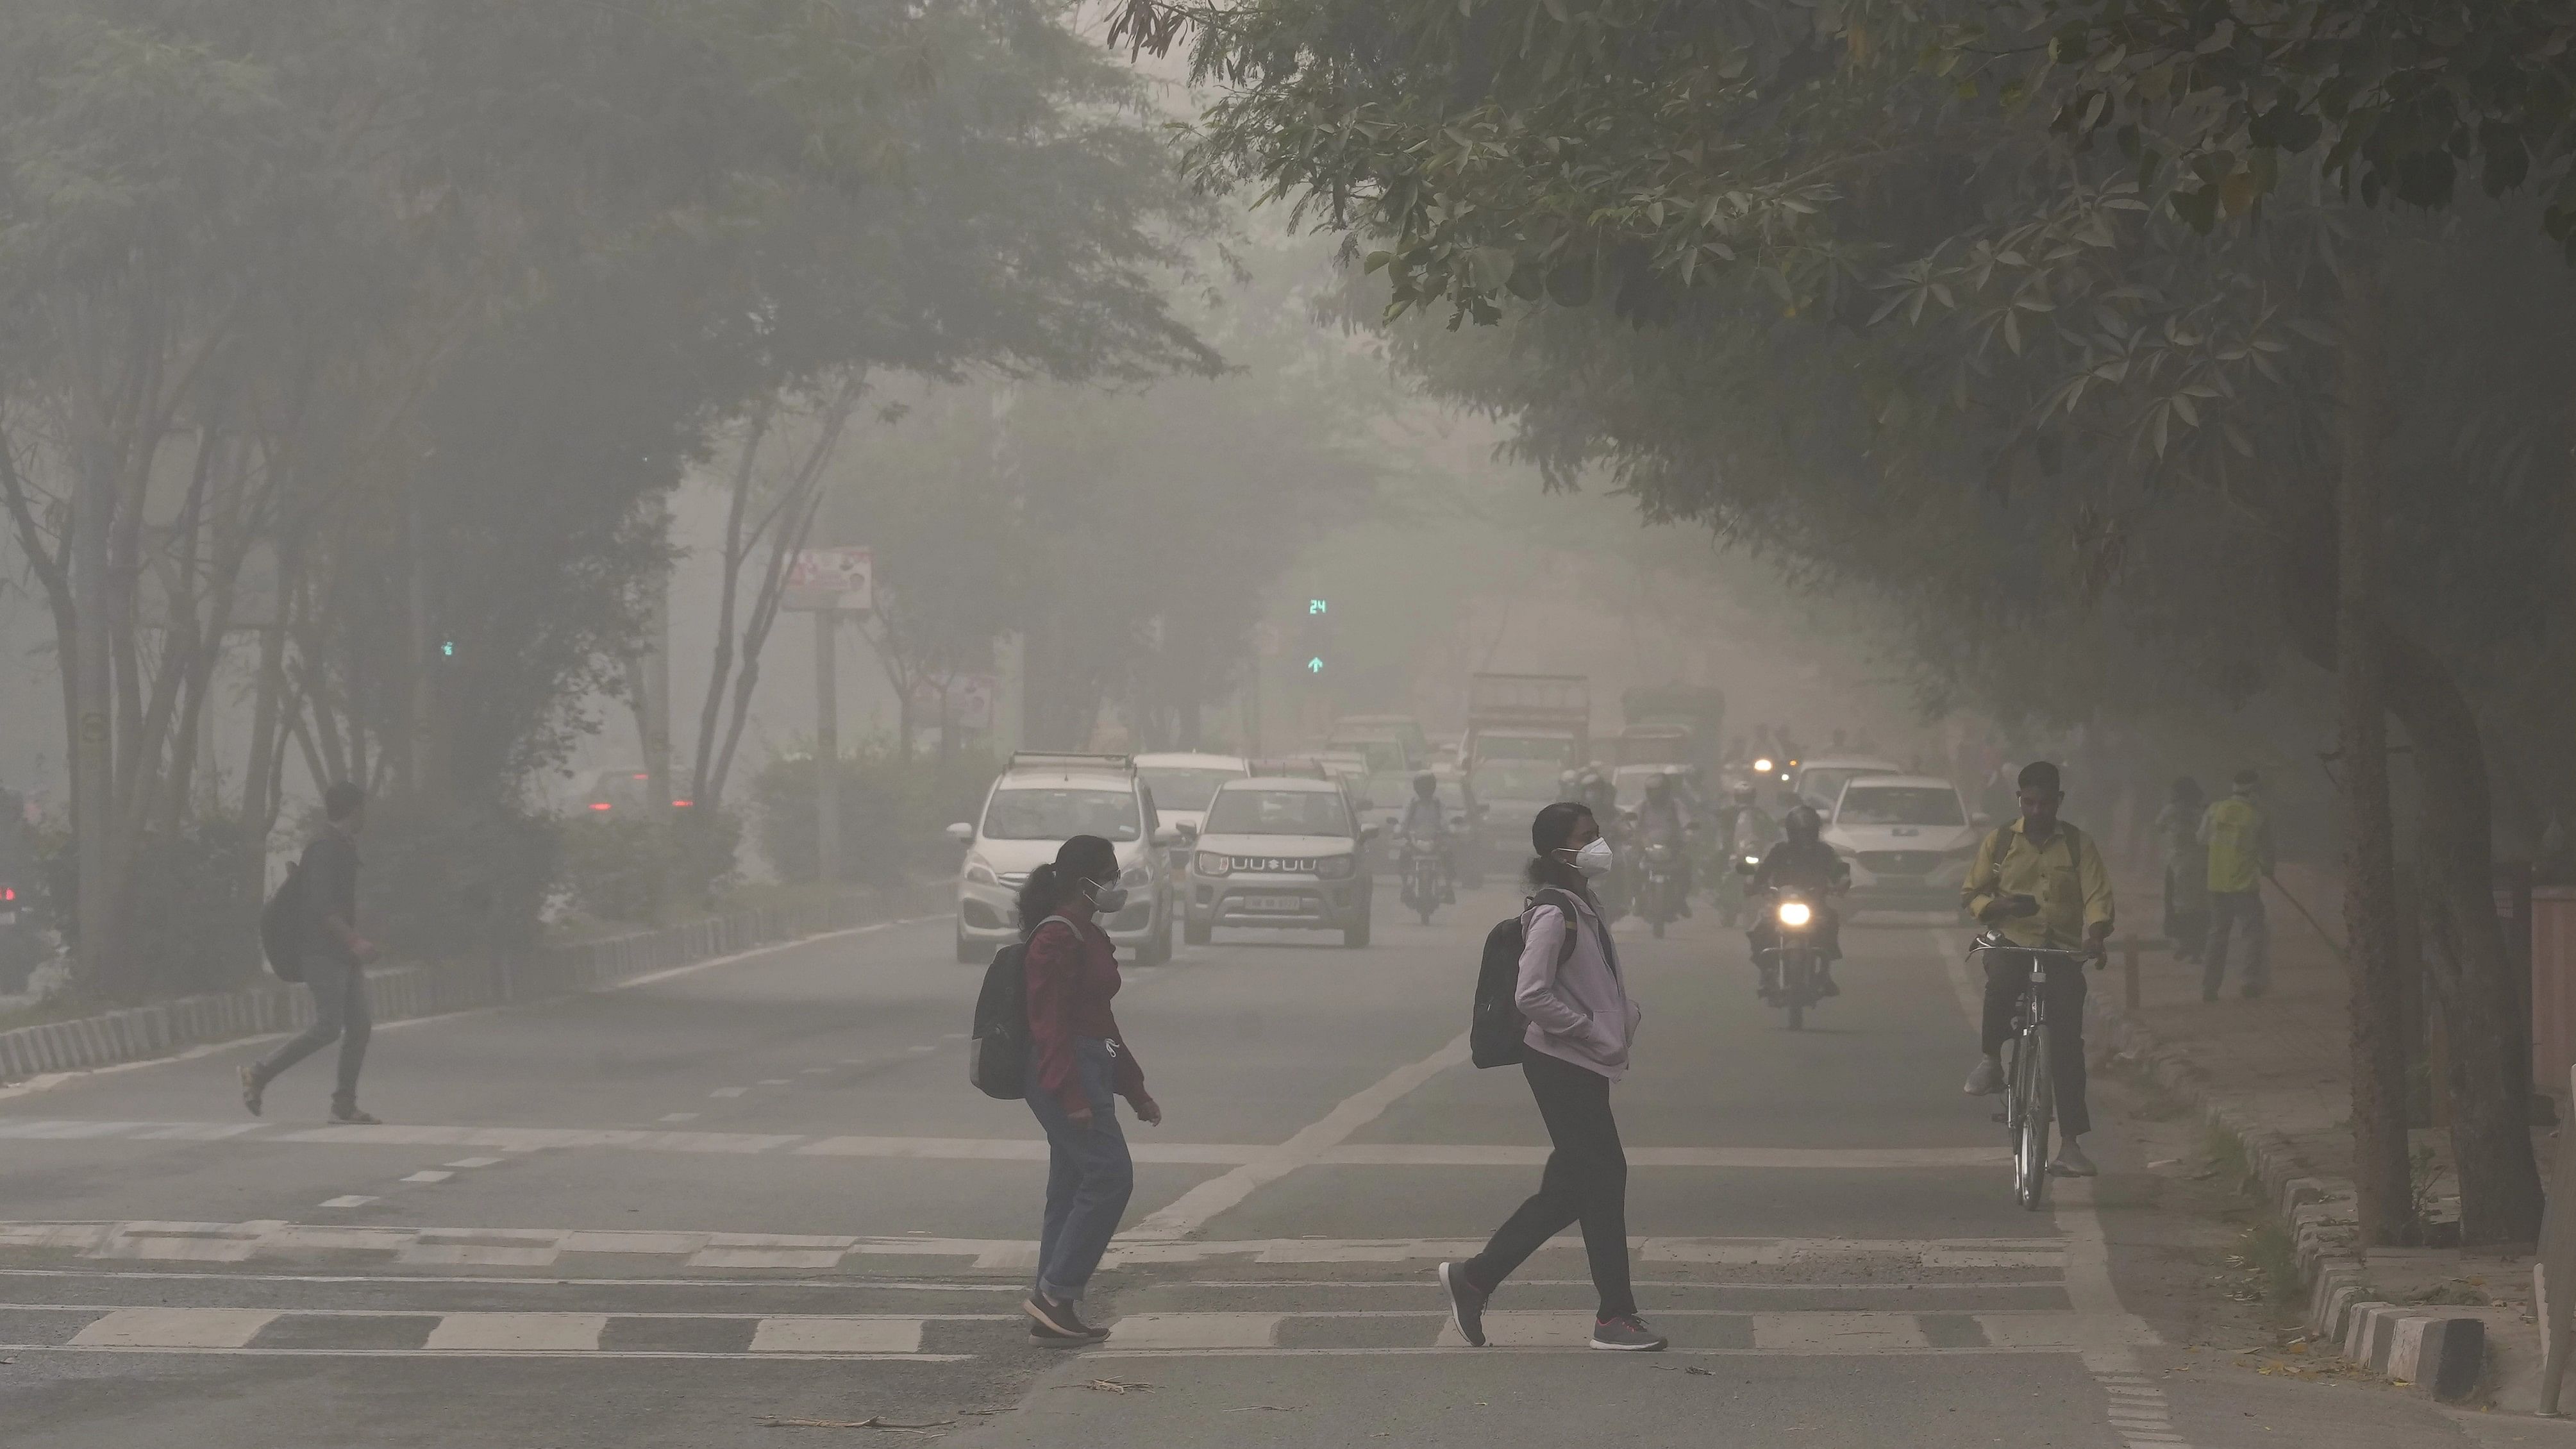 <div class="paragraphs"><p>New Delhi: Students wearing anti-pollution masks cross a road amid hazy weather conditions, in New Delhi. Delhi-NCR's air quality neared the emergency threshold on Thursday, prompting an immediate ban on non-essential construction work and the closure of primary schools in the capital. </p></div>